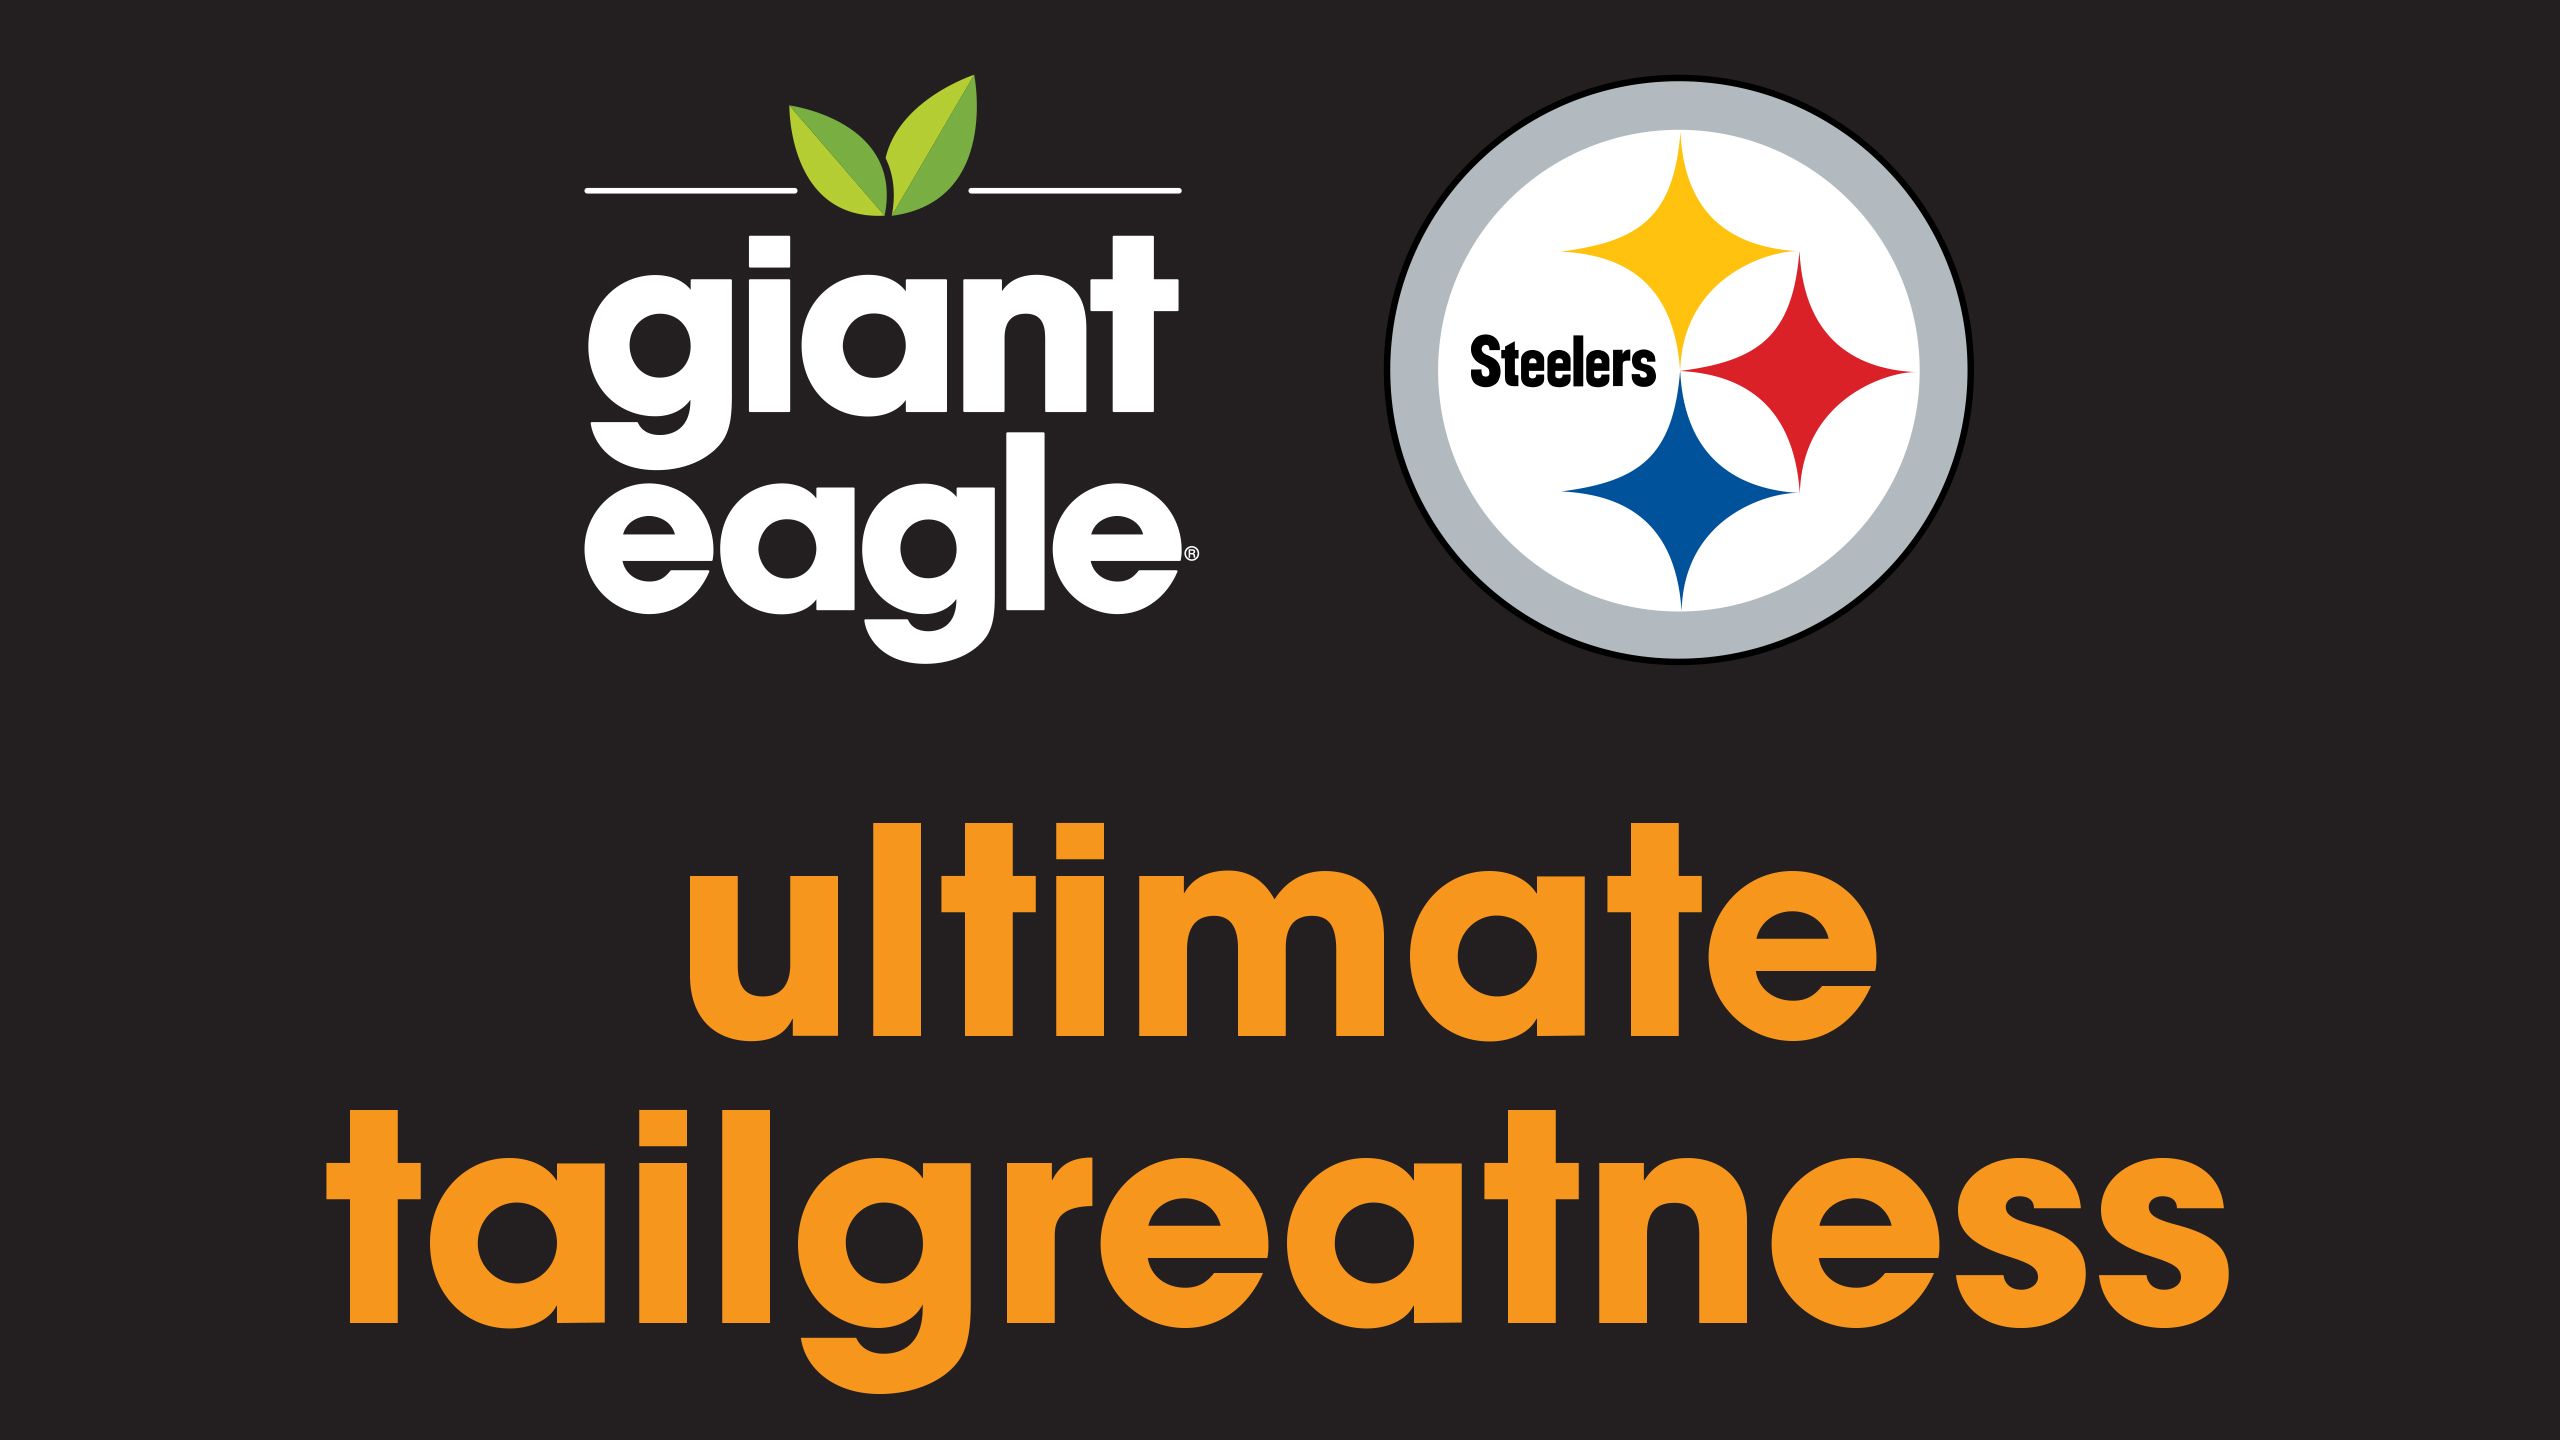 Gear up for the game and come visit - Pittsburgh Steelers